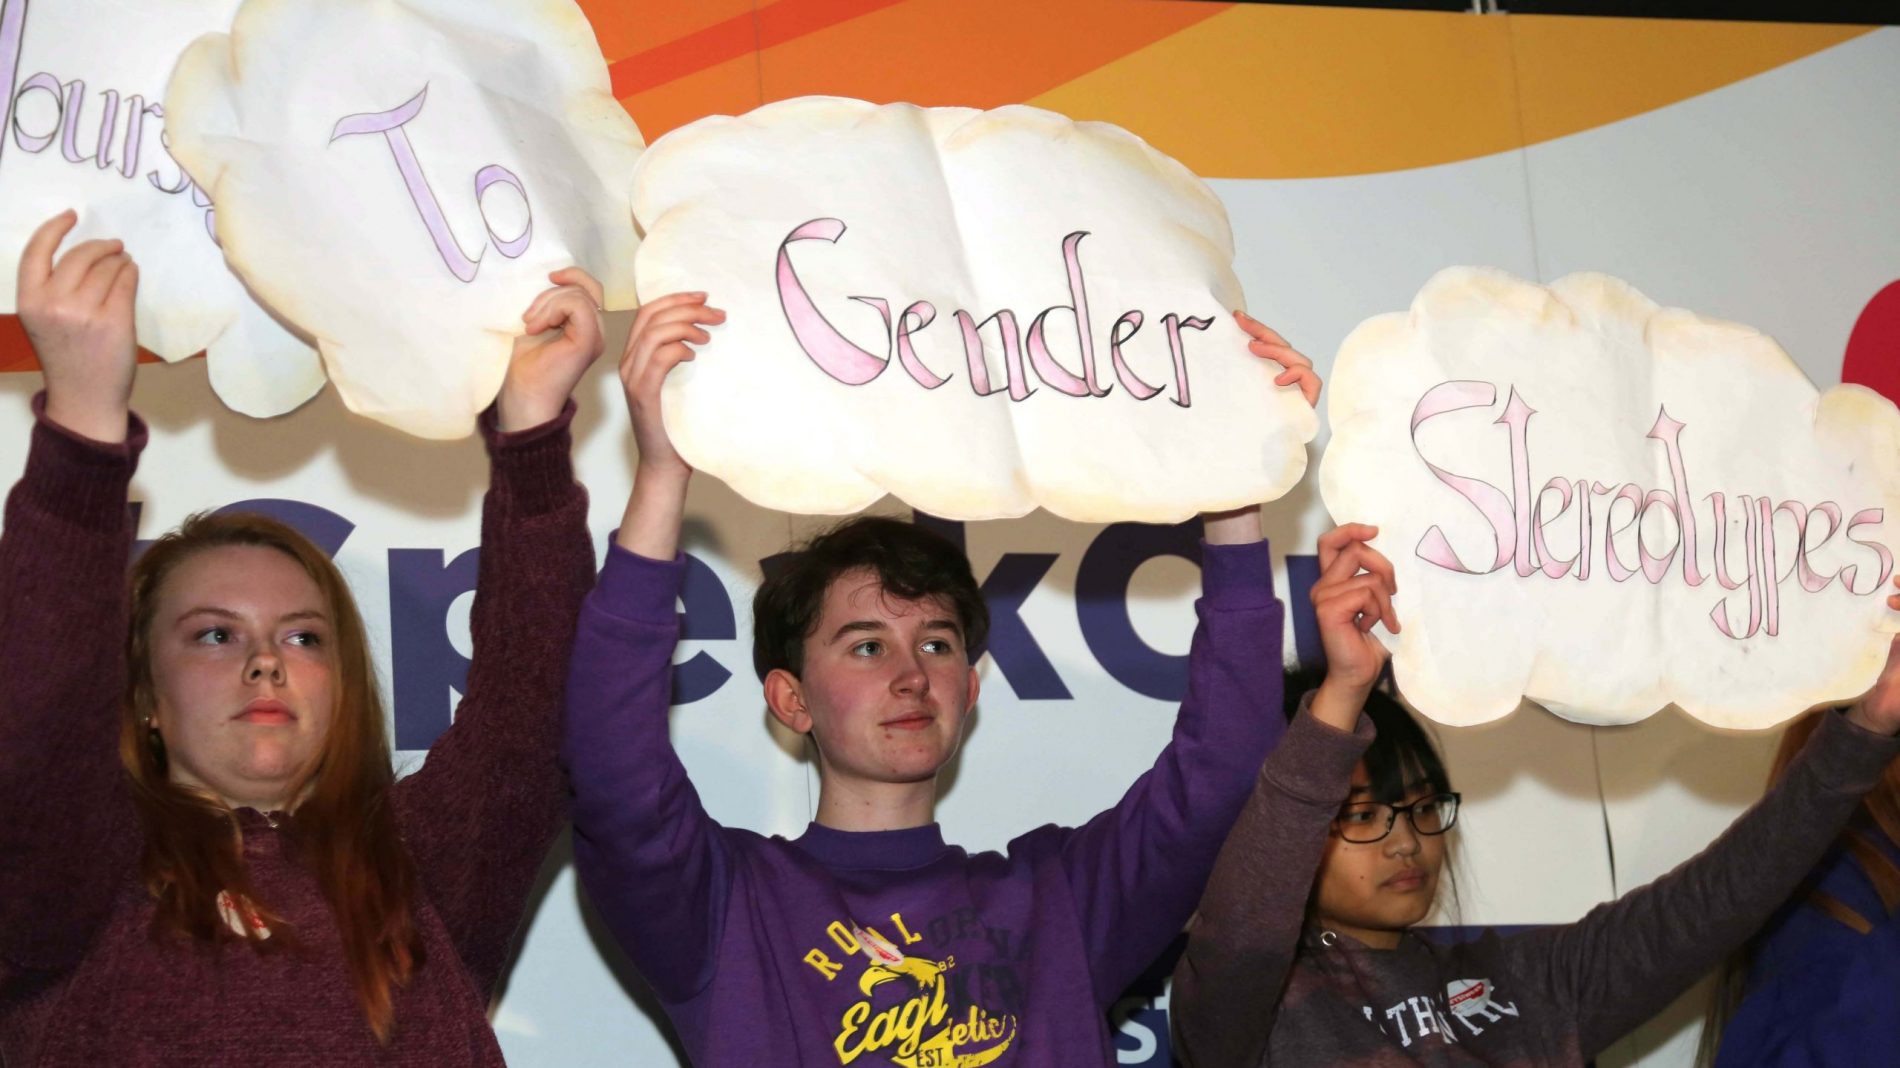 Students from Maryfield College hold up signs against gender stereotypes